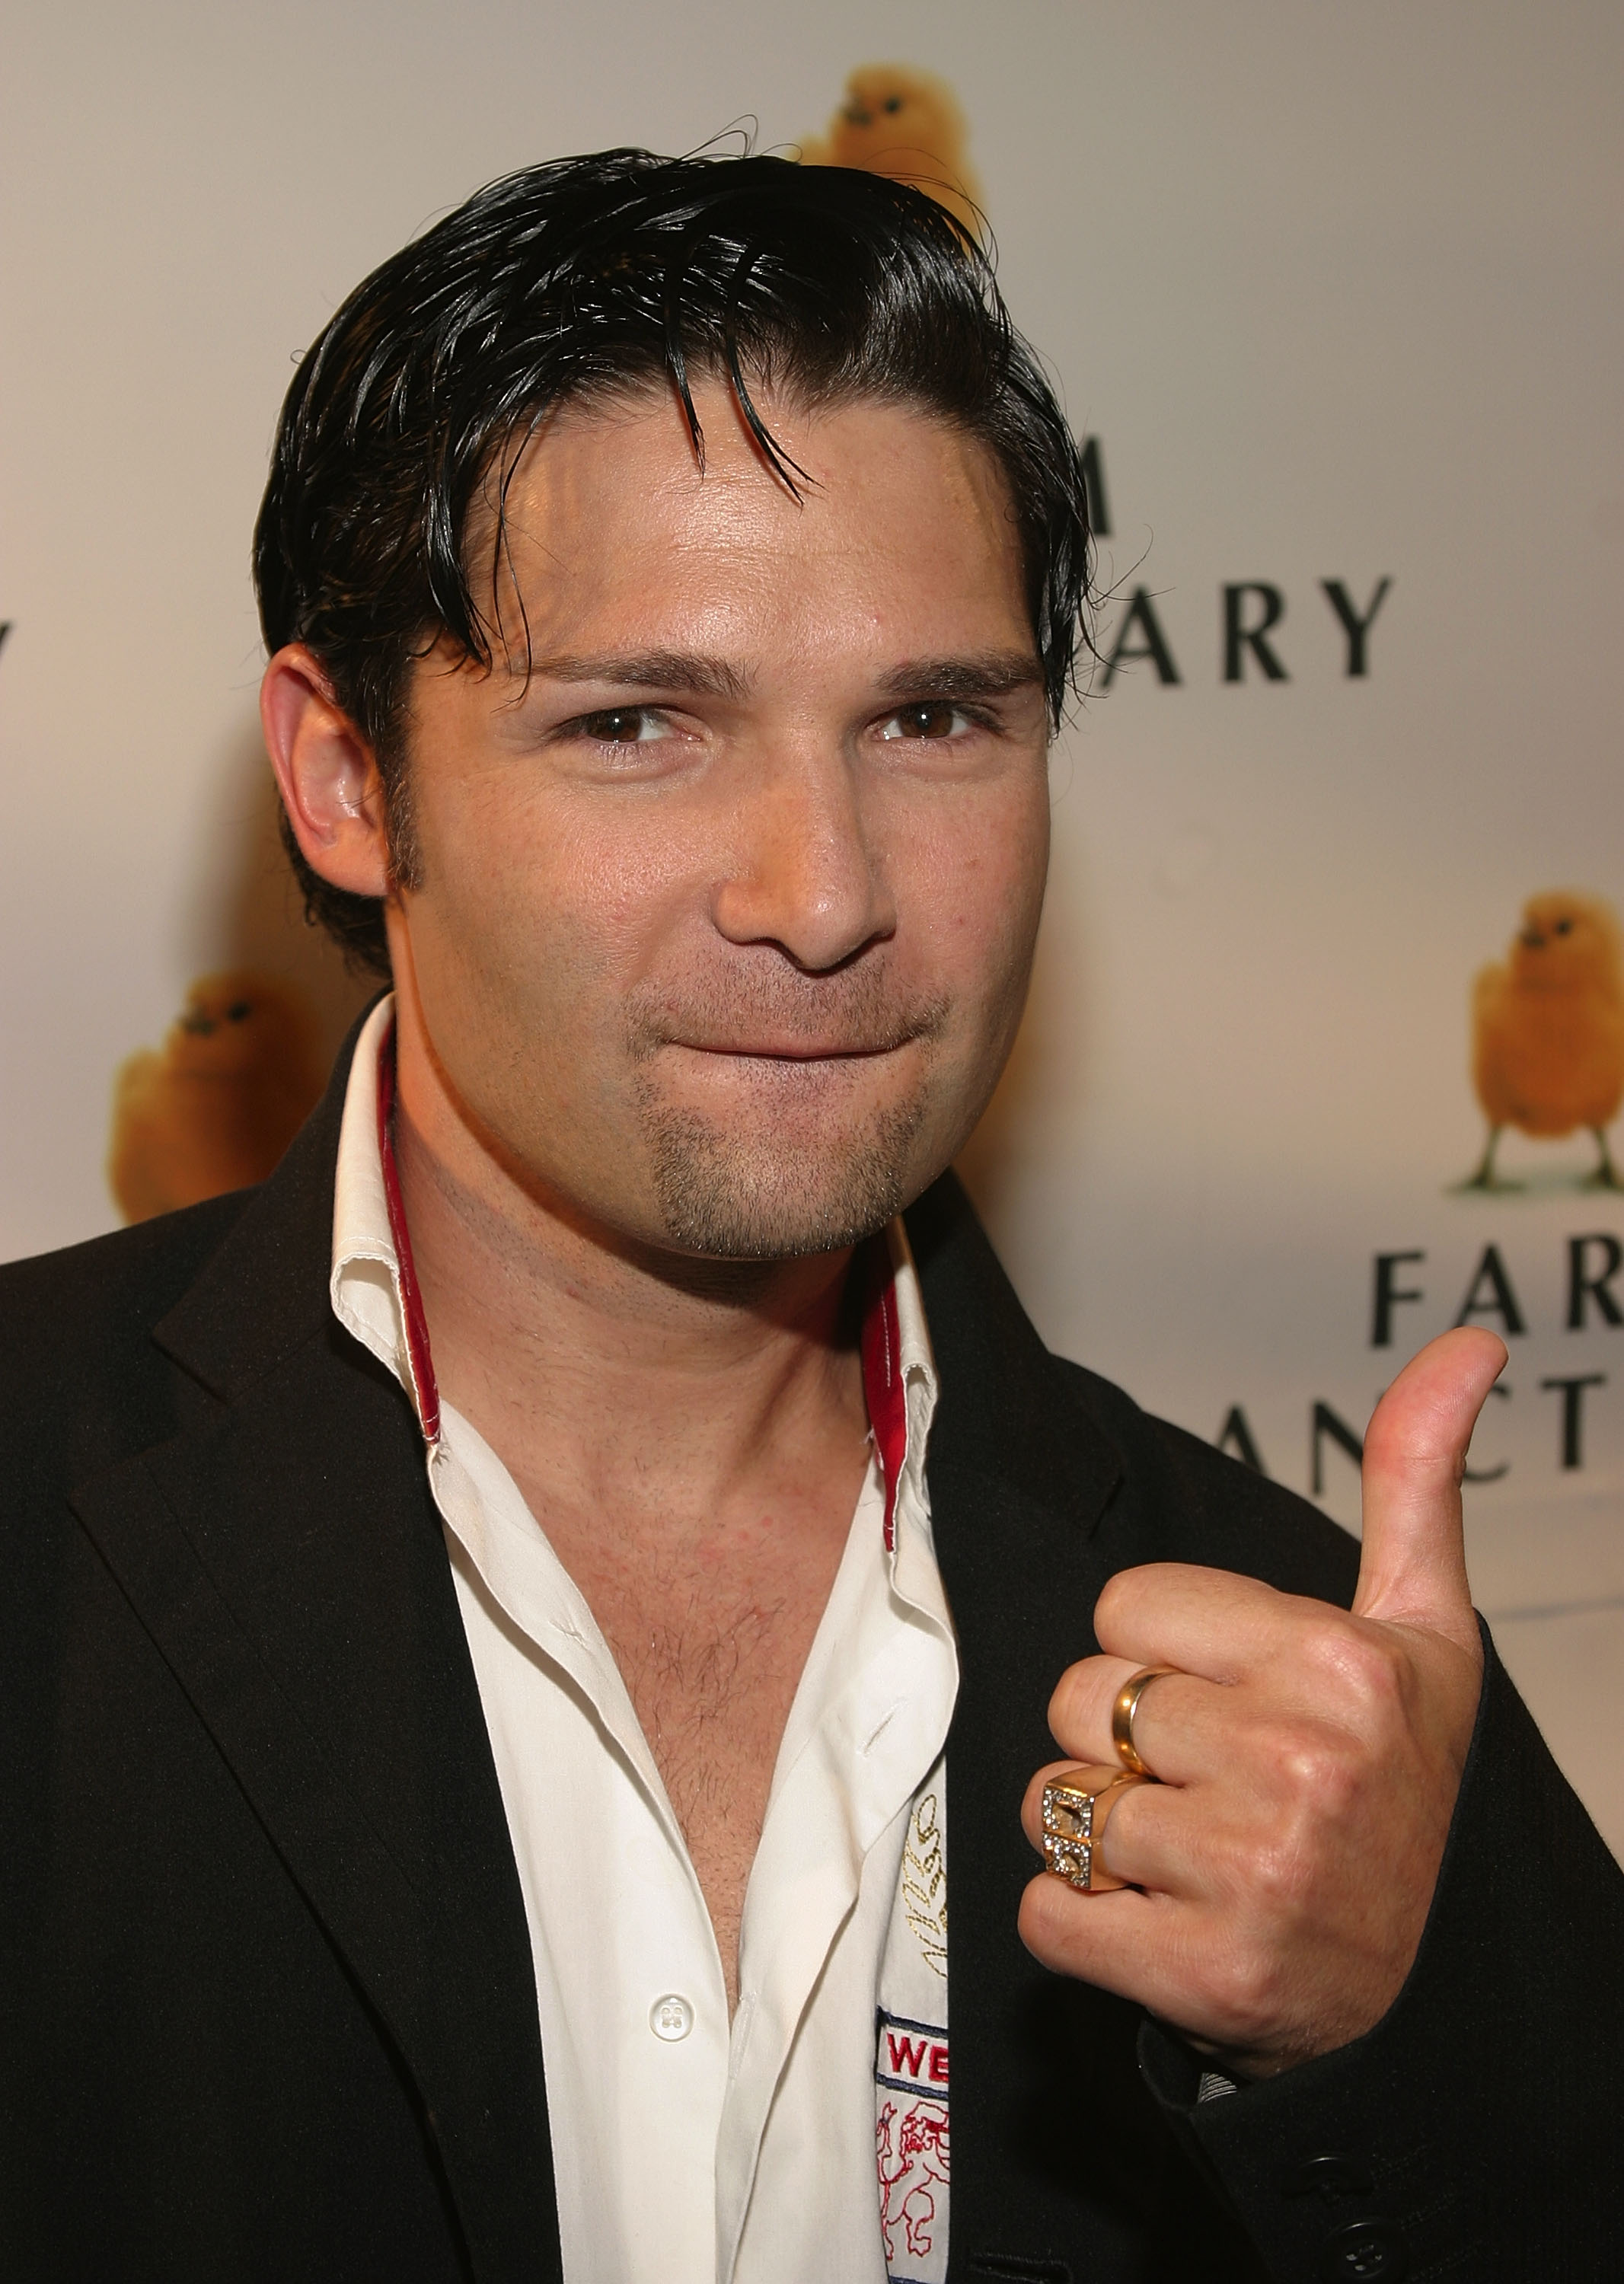 Corey Feldman attends the Farm Sanctuary Gala 2004 on May 22, 2004 in New York City. | Source: Getty Images